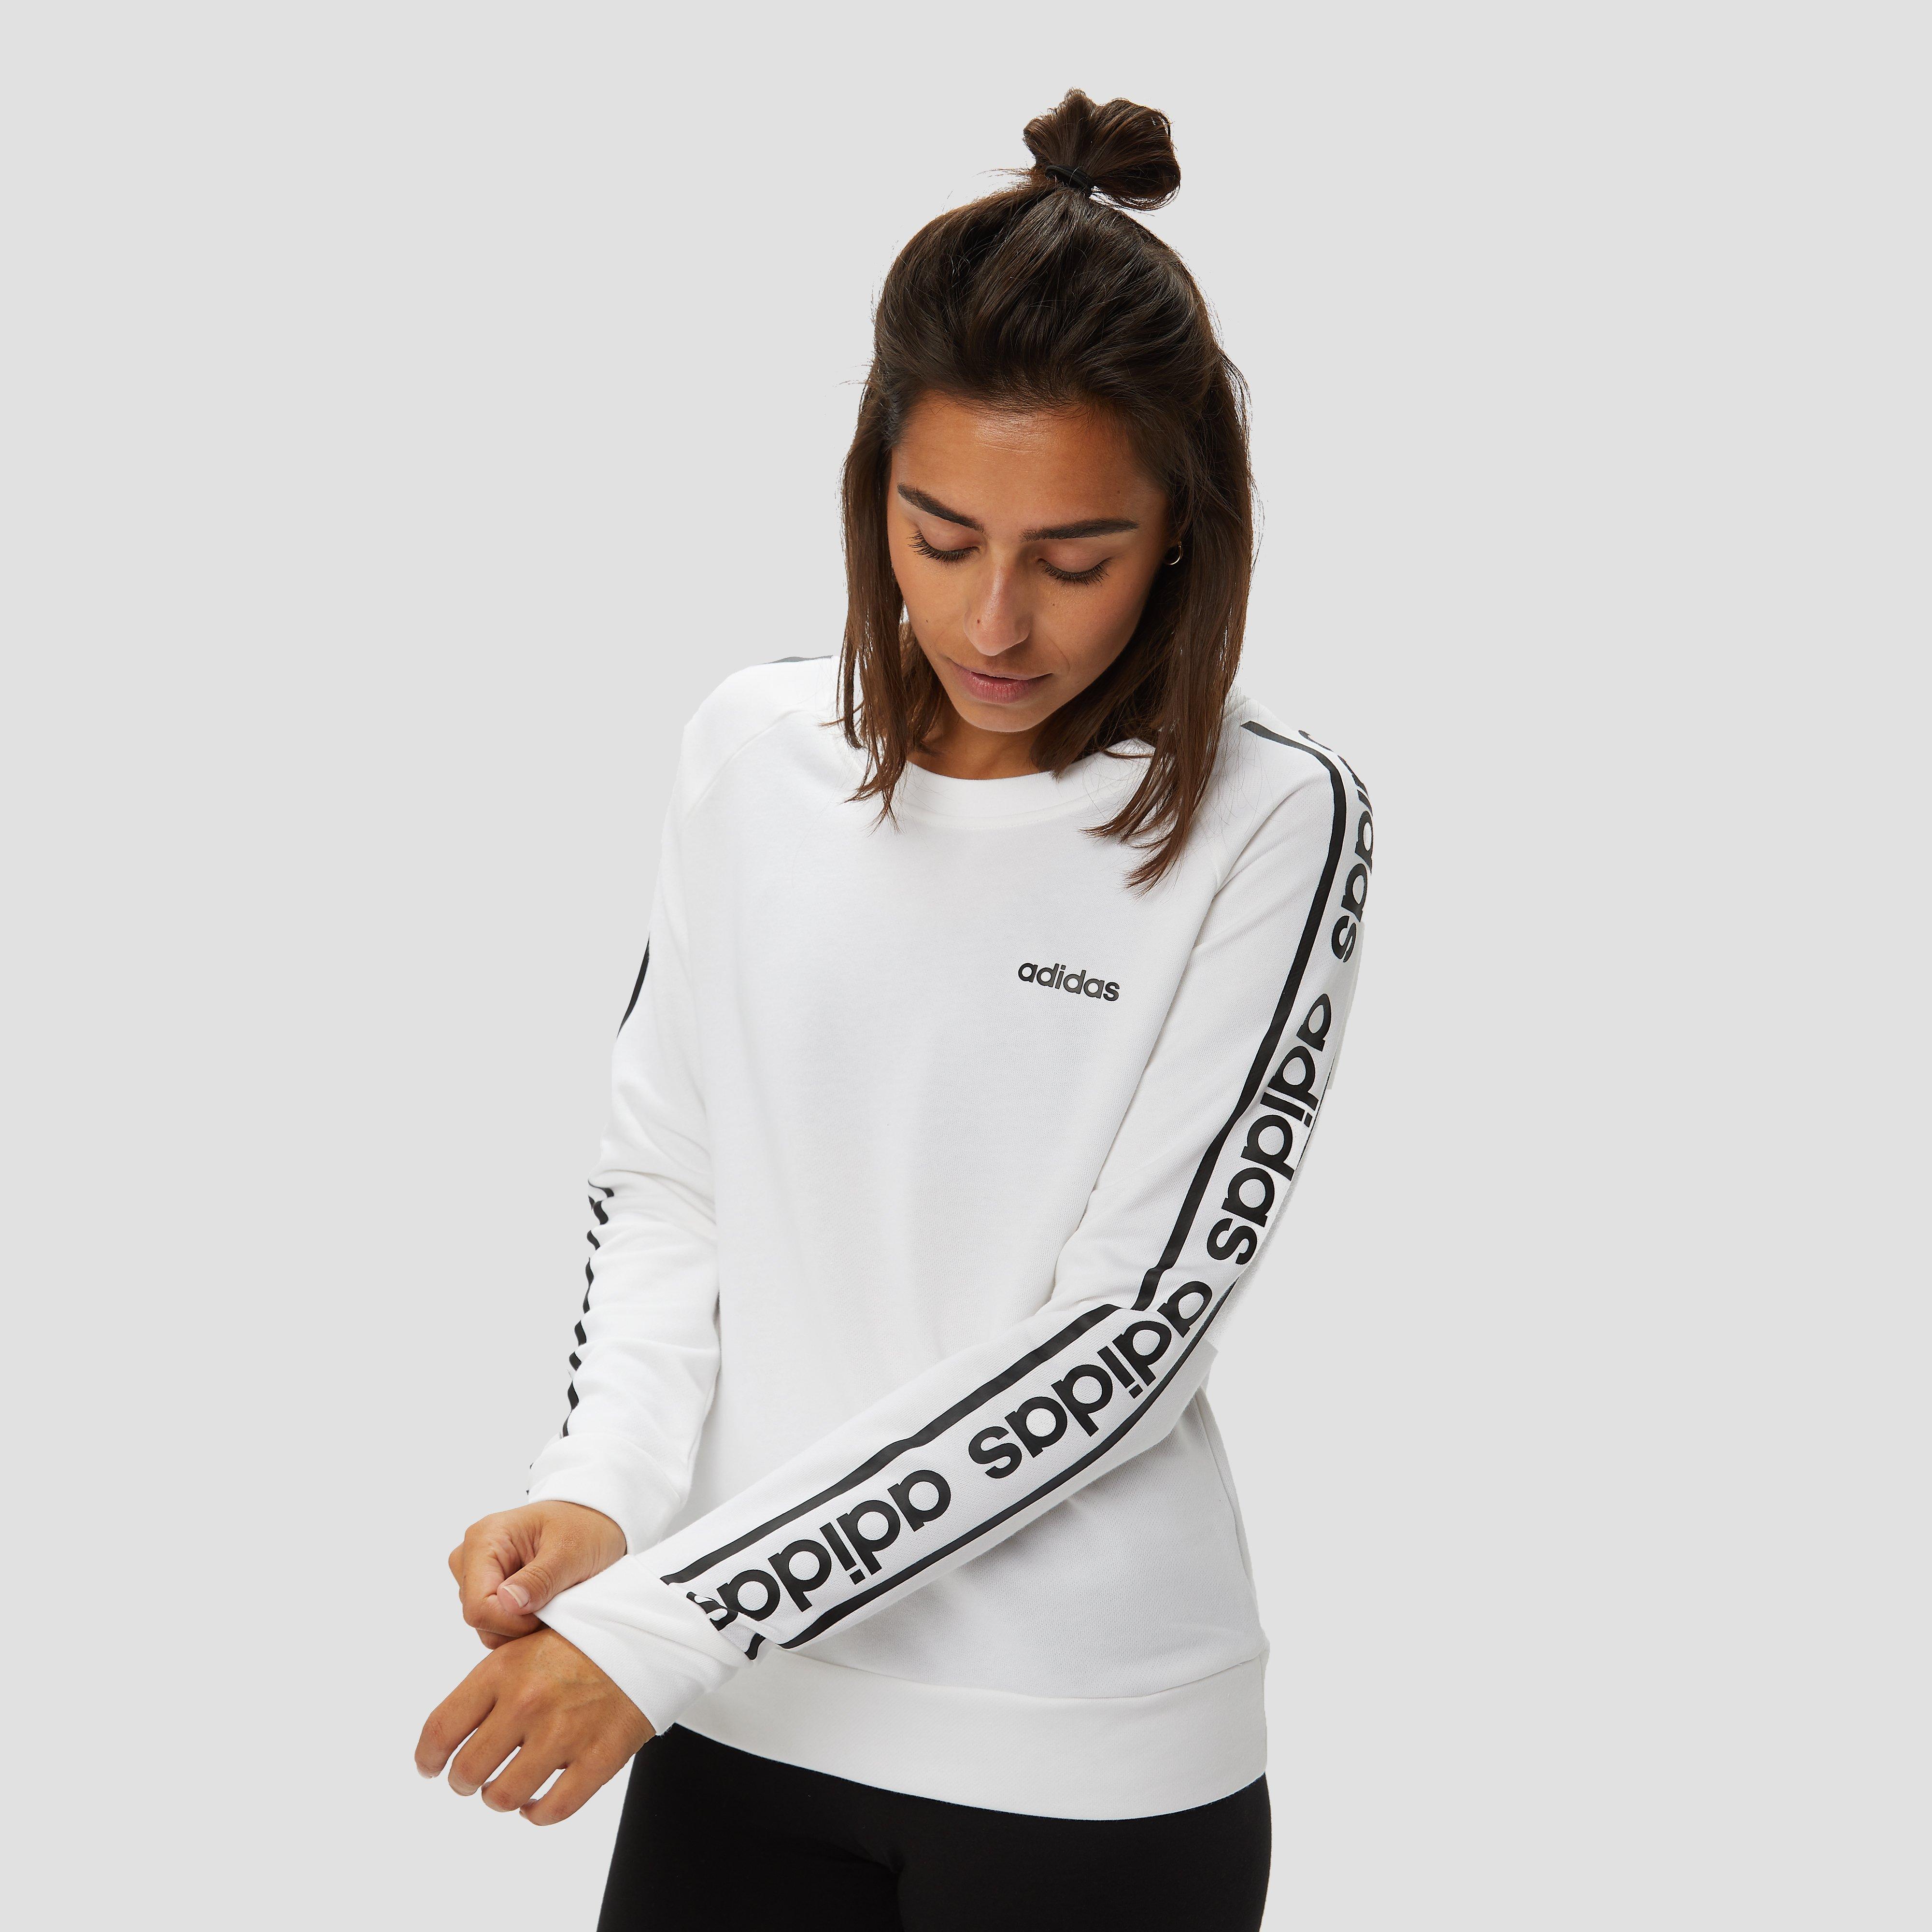 adidas sweater dames sale Off 57% - www.bashhguidelines.org